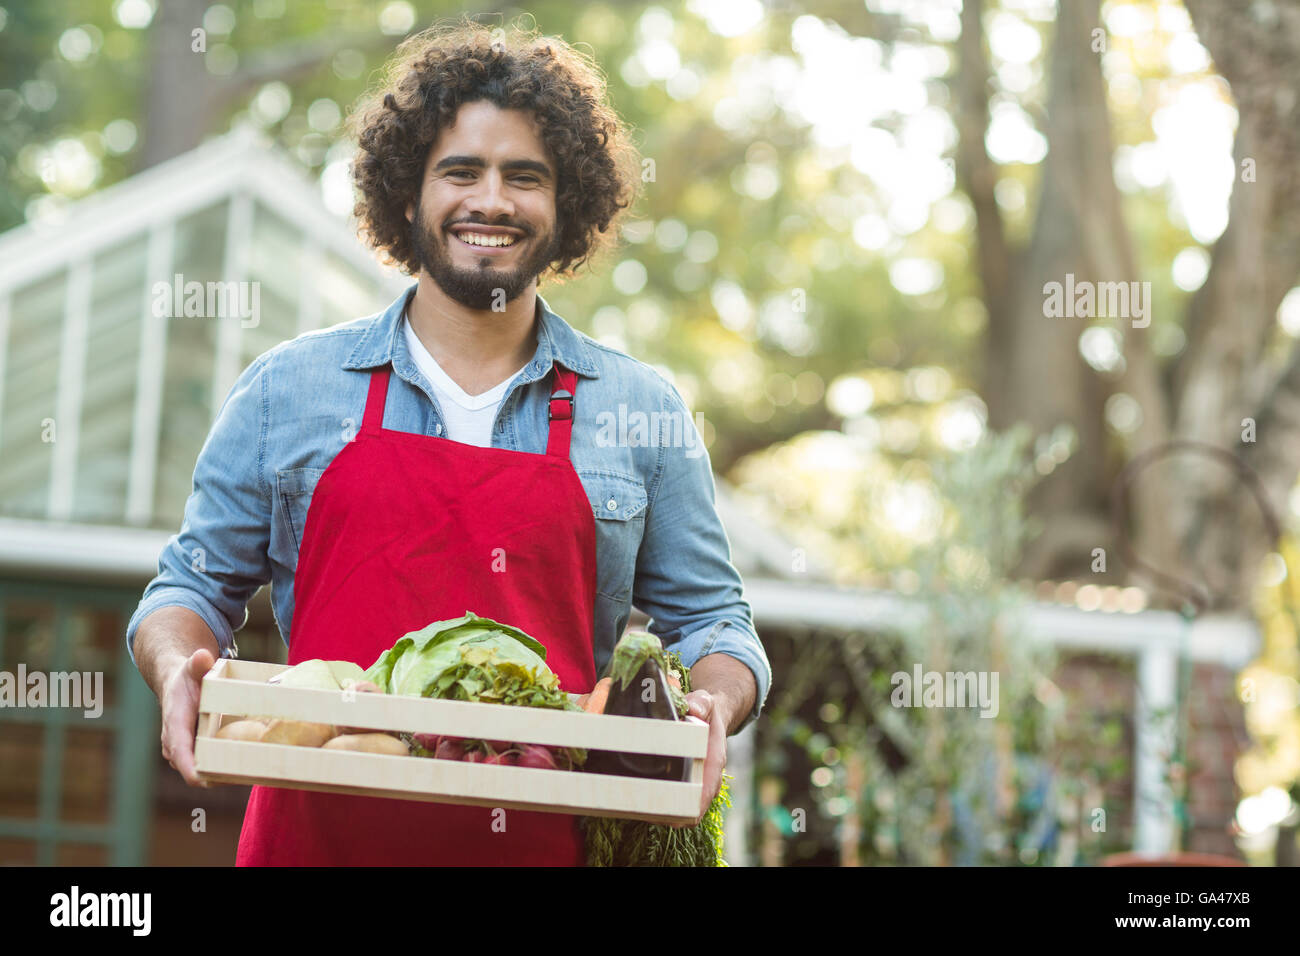 Male gardener holding vegetables crate outside greenhouse Stock Photo